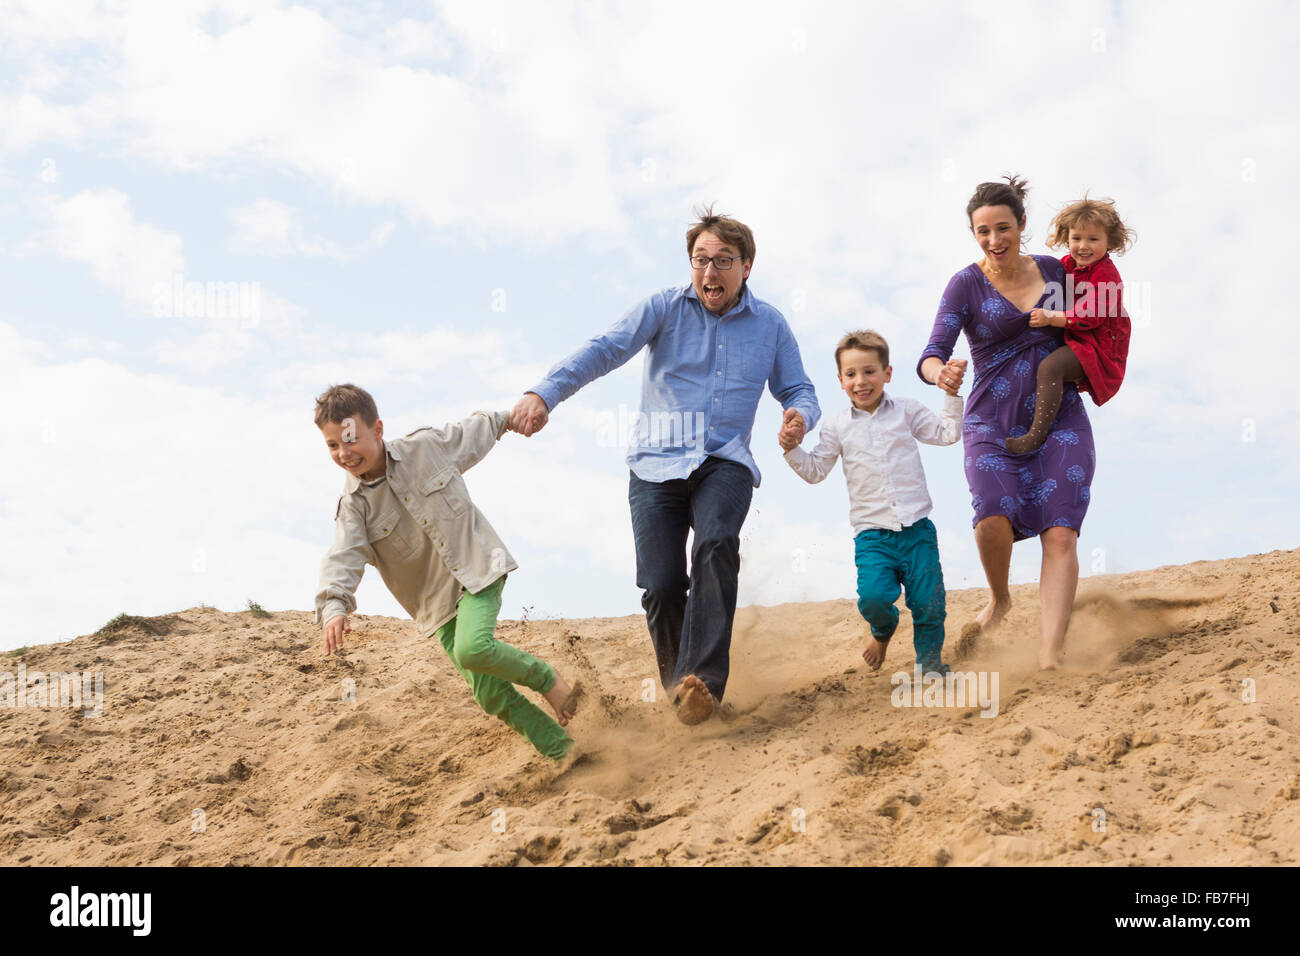 Cheerful family holding hands while running on sand dune against sky Banque D'Images